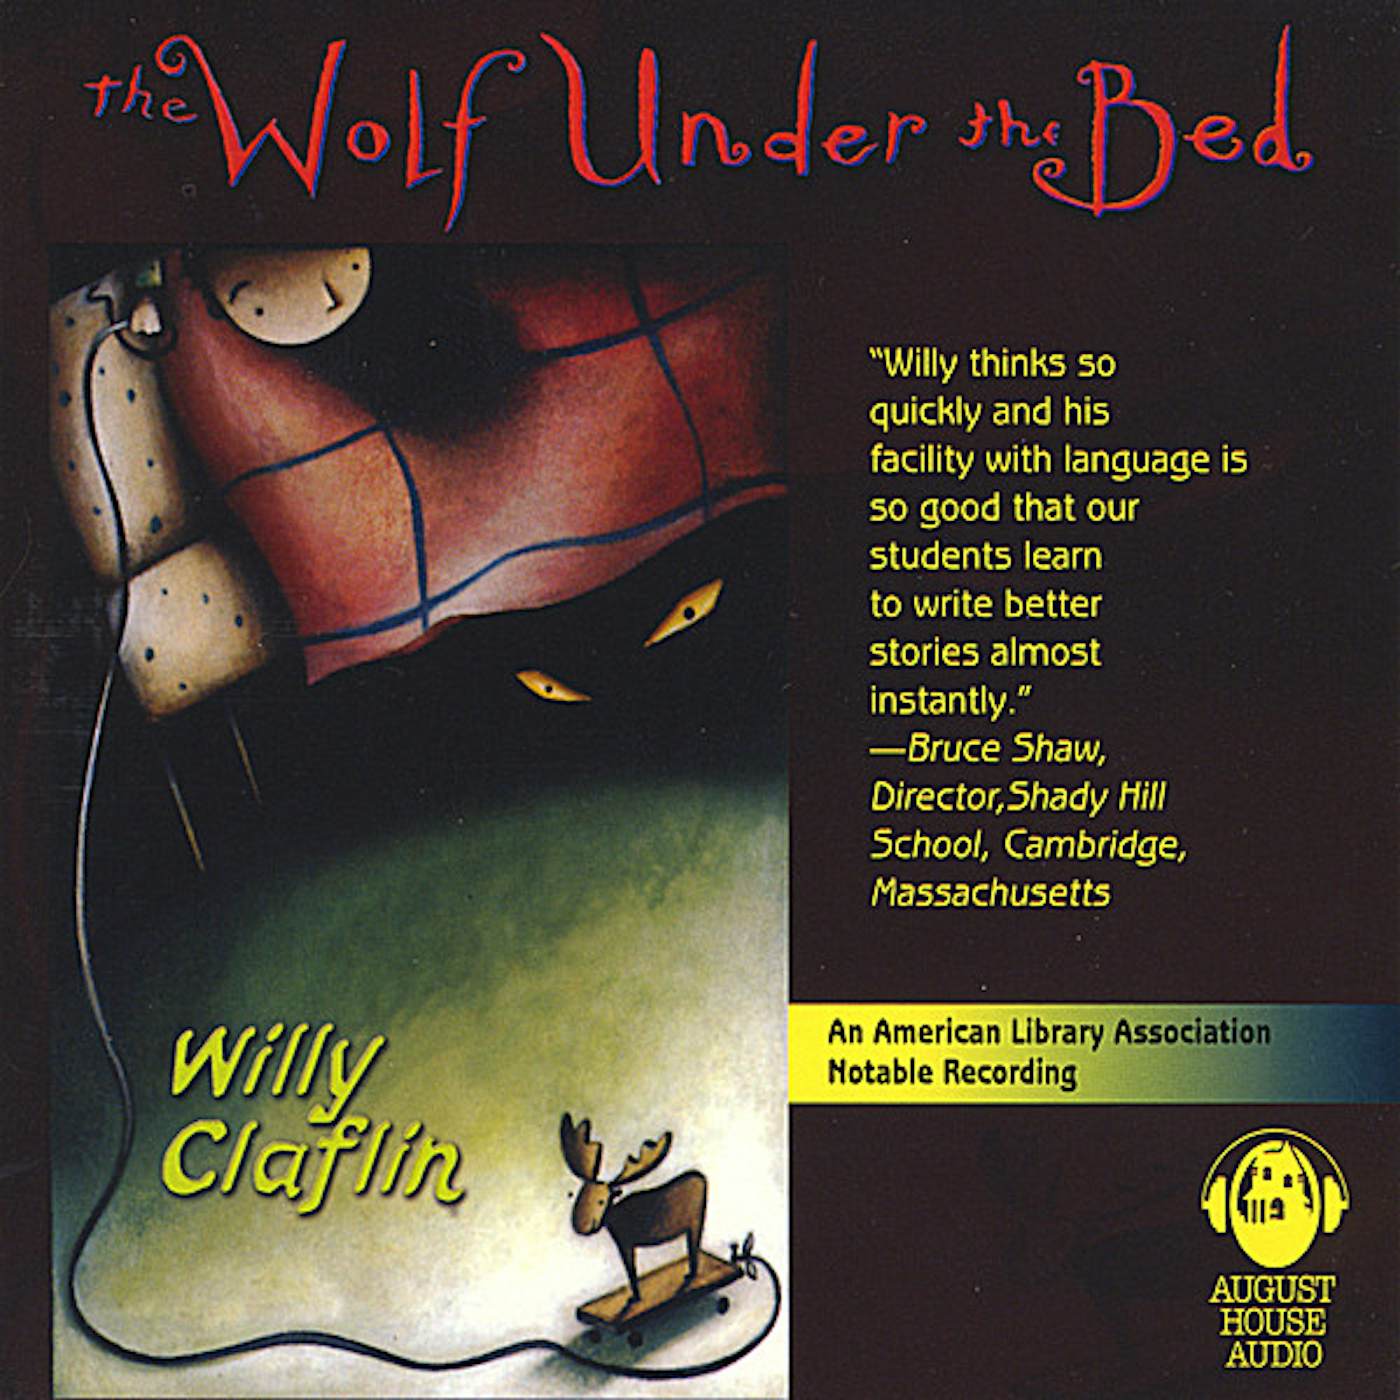 Willy Claflin WOLF UNDER THE BED CD